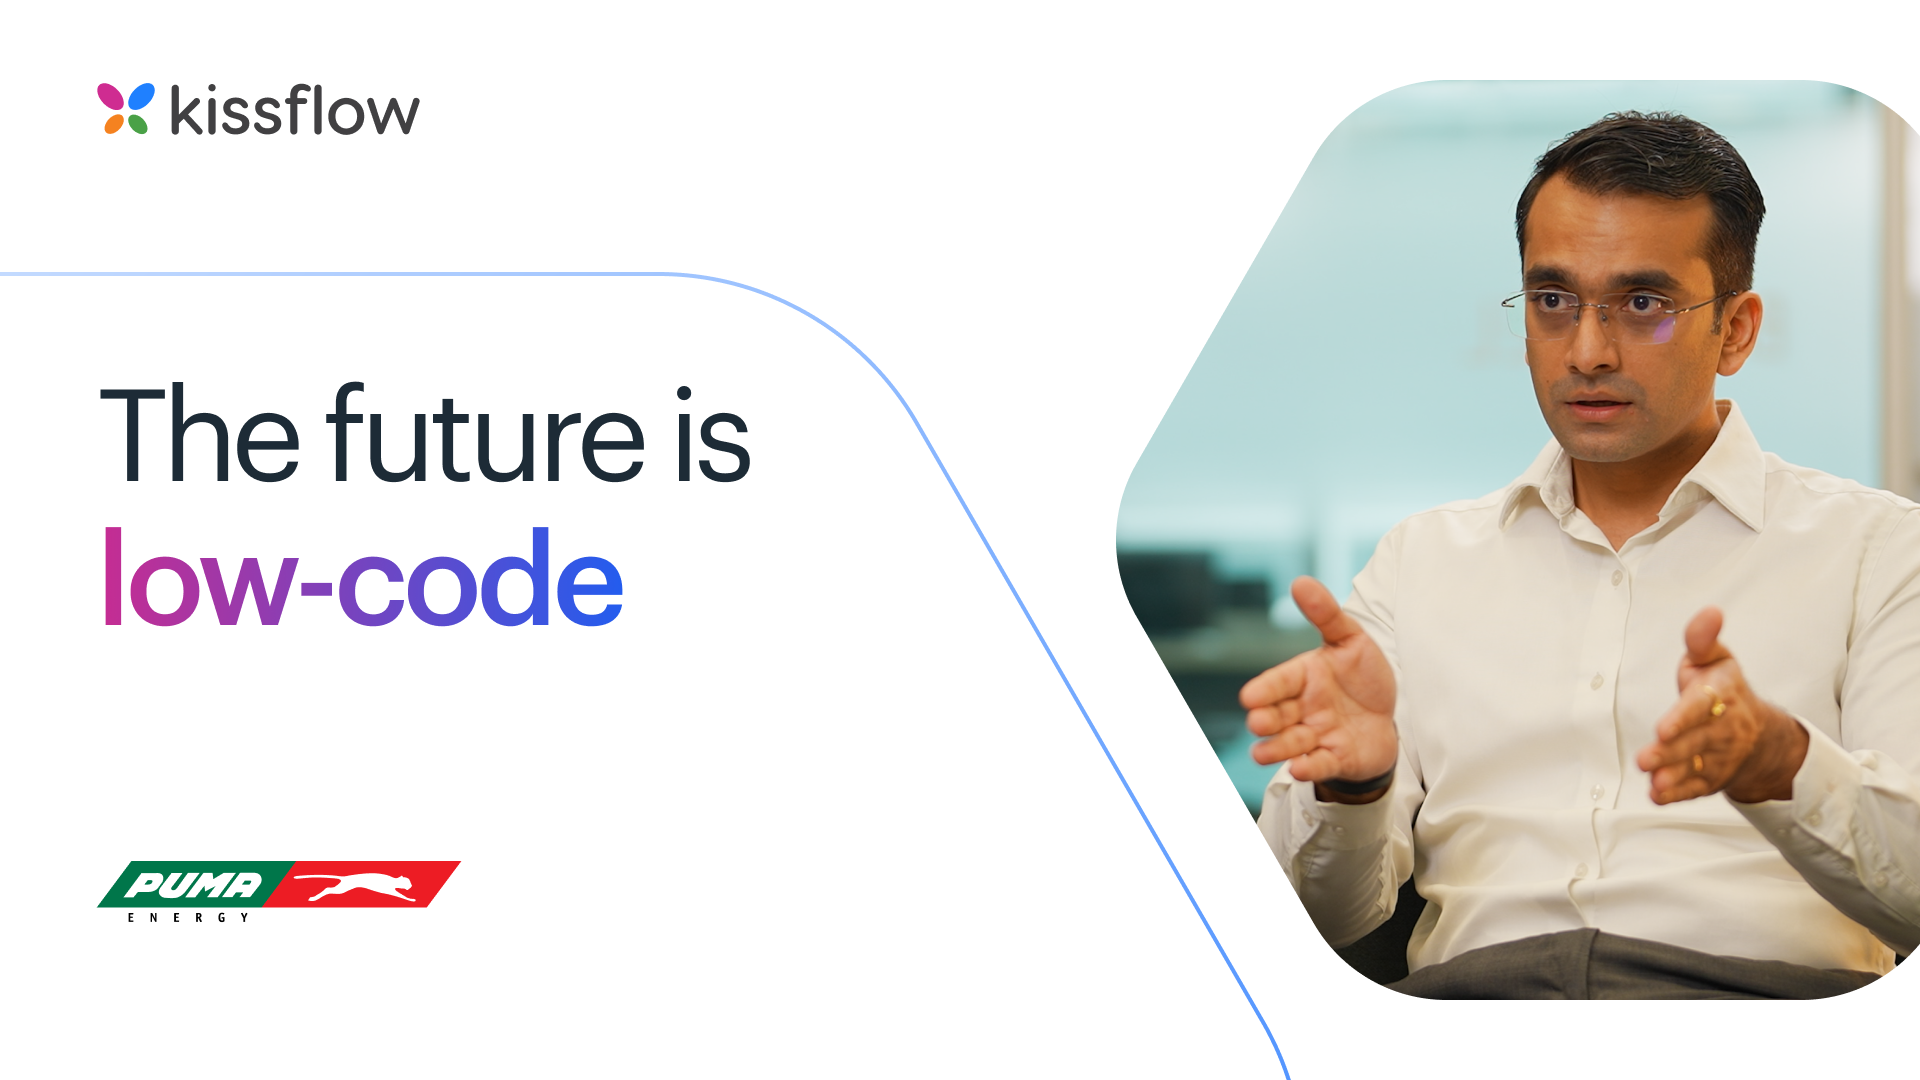 The future is low-code